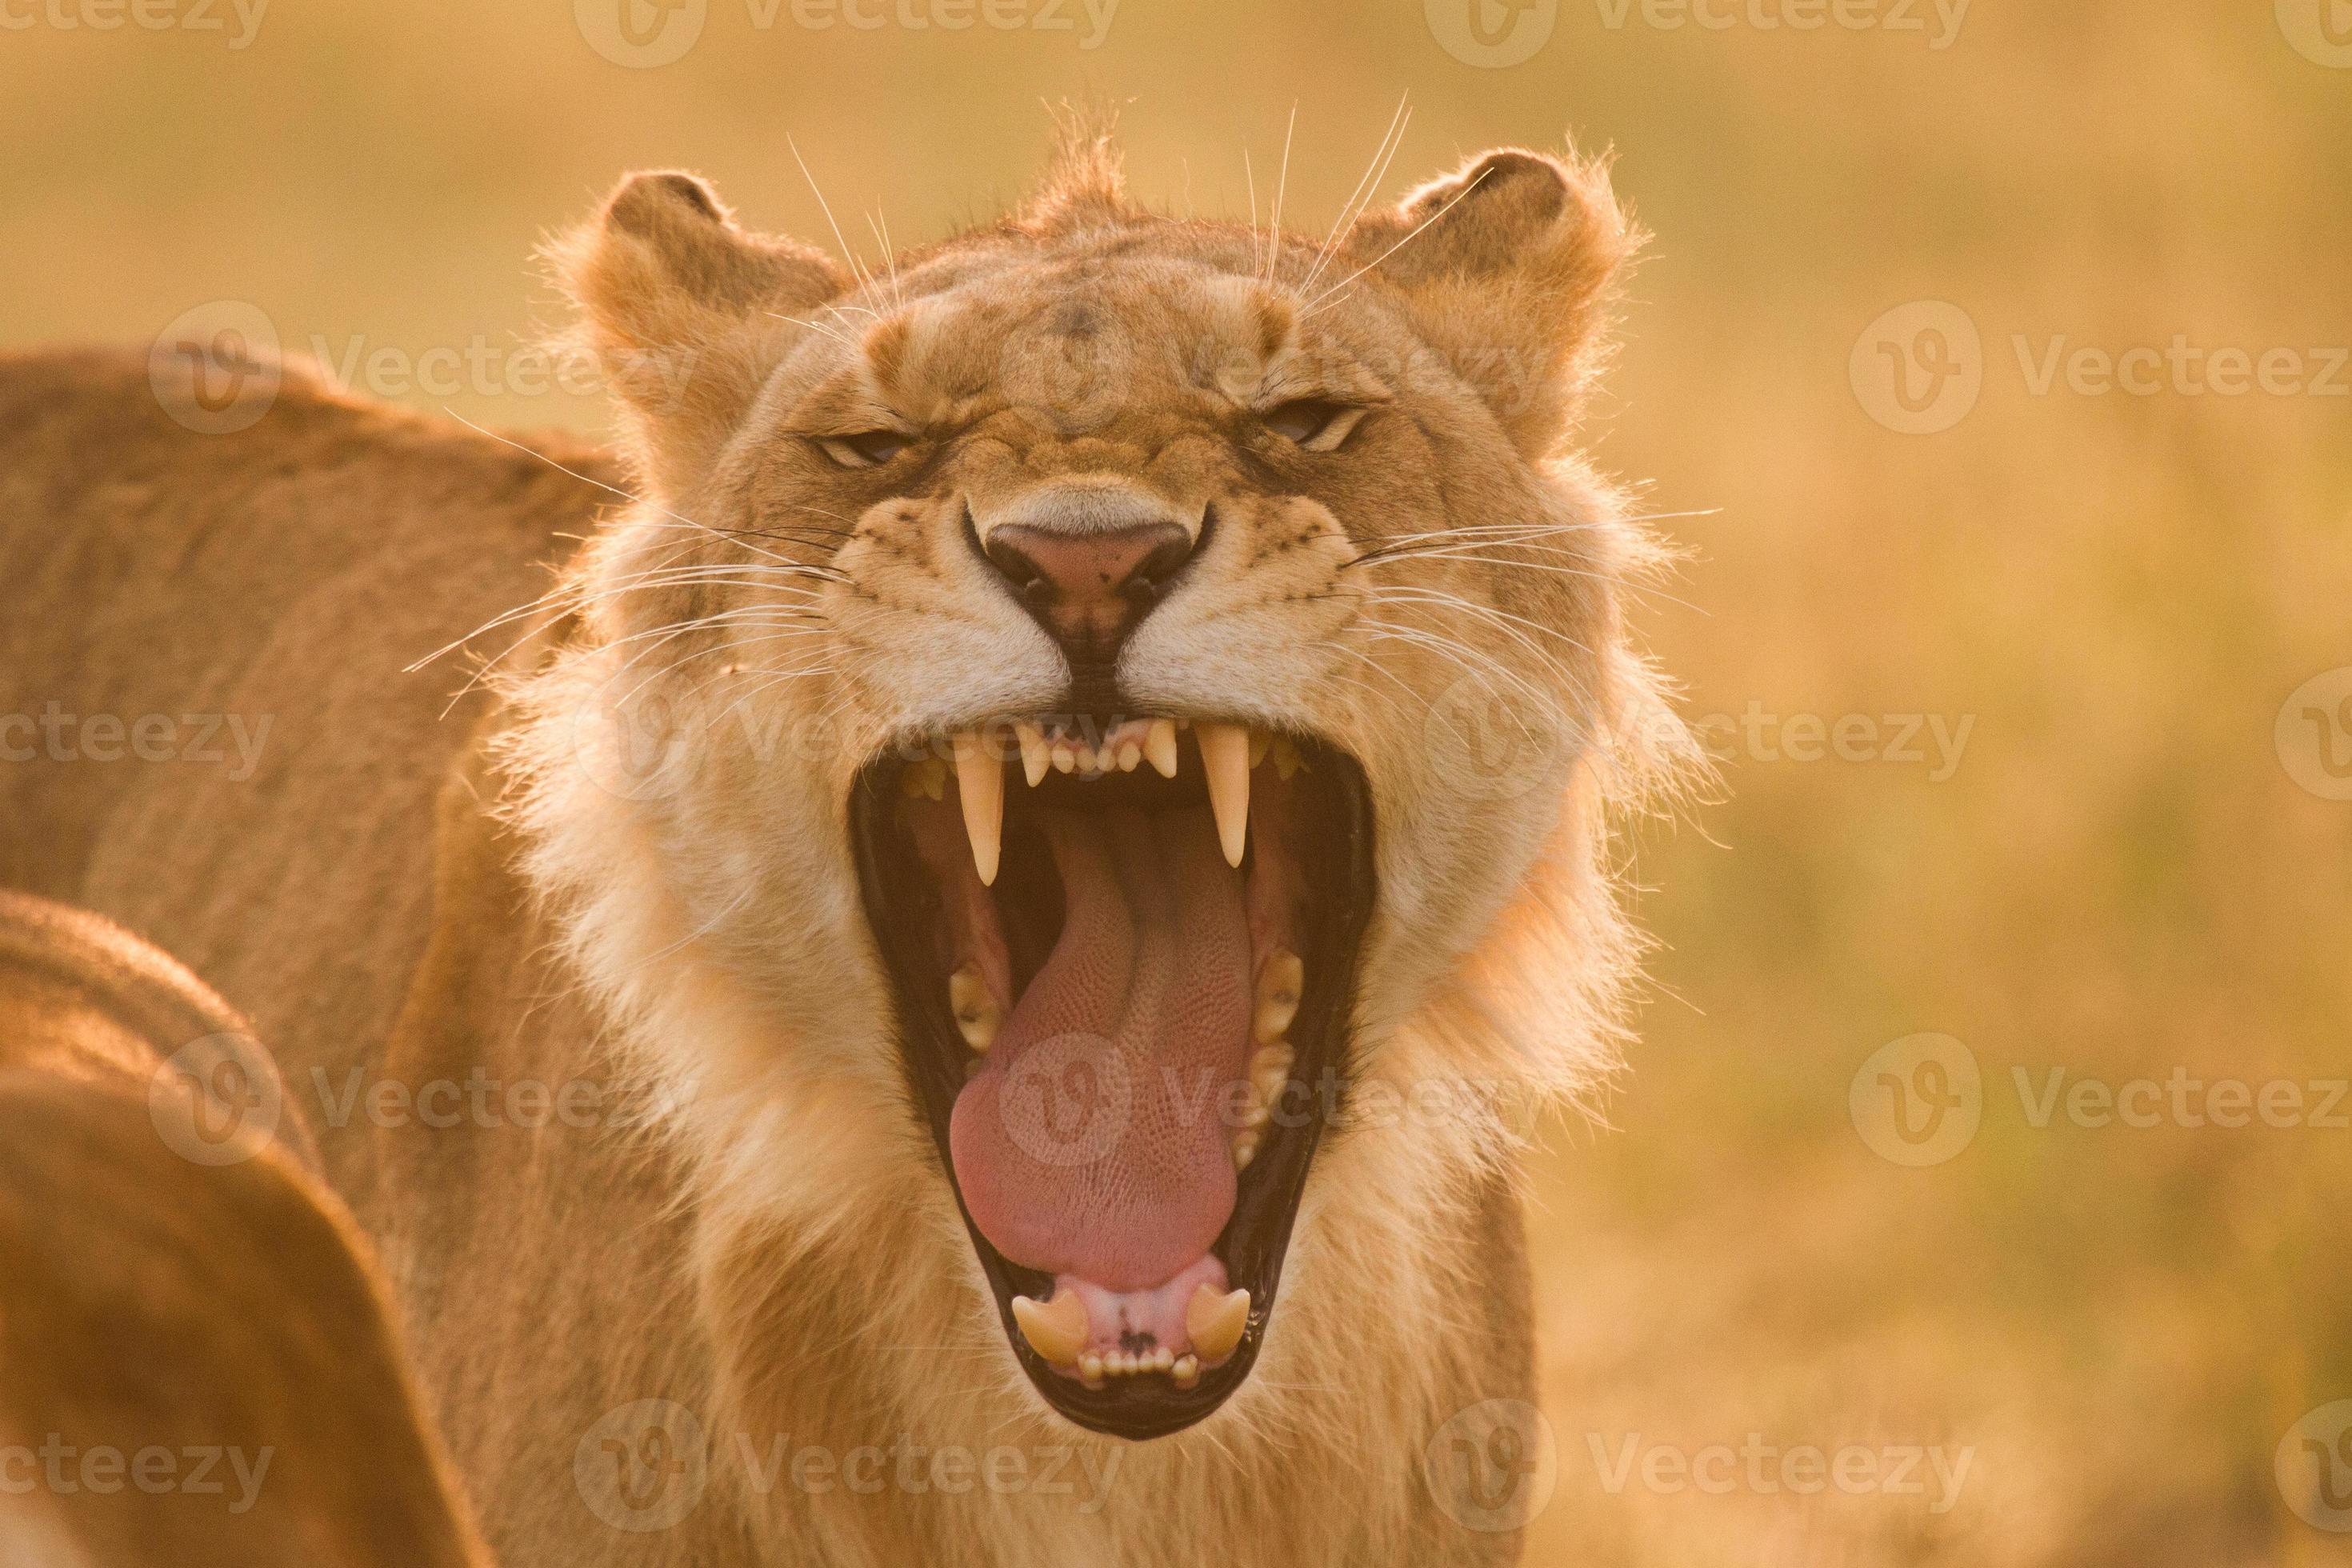 Young Lion Roaring in the Morning Sun photo